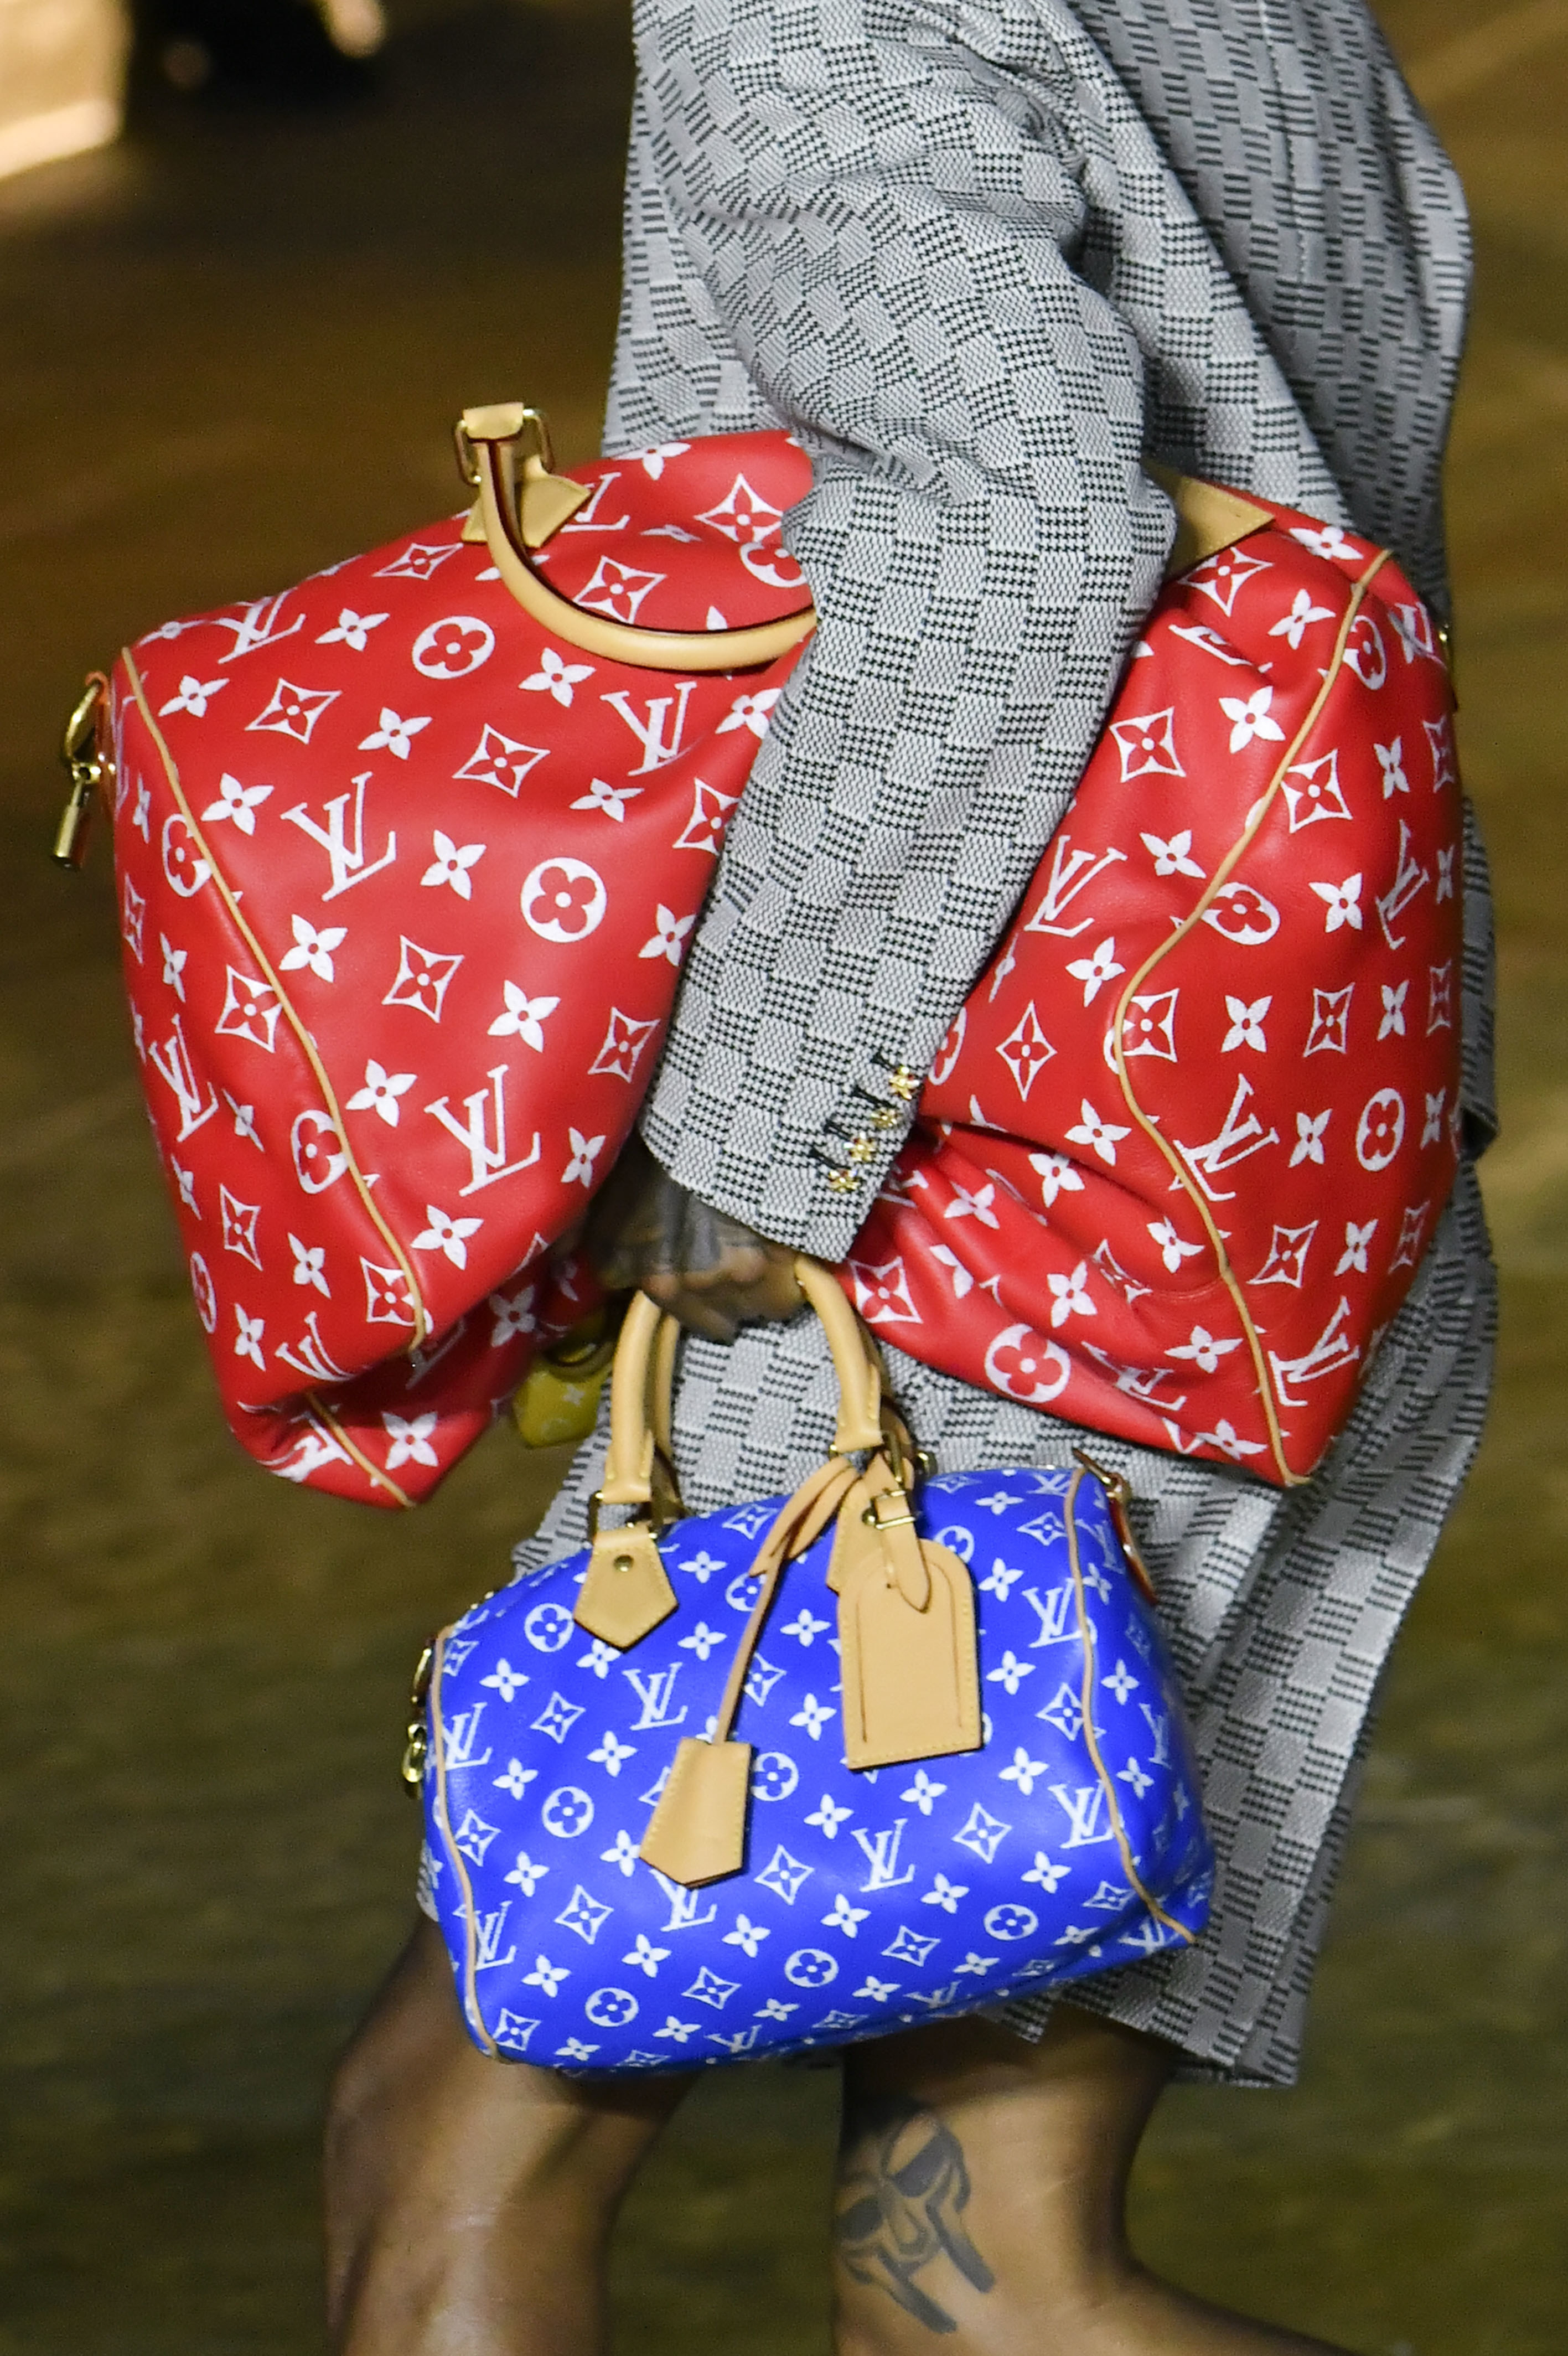 Behind The Scenes of Pharrell's Louis Vuitton Collection